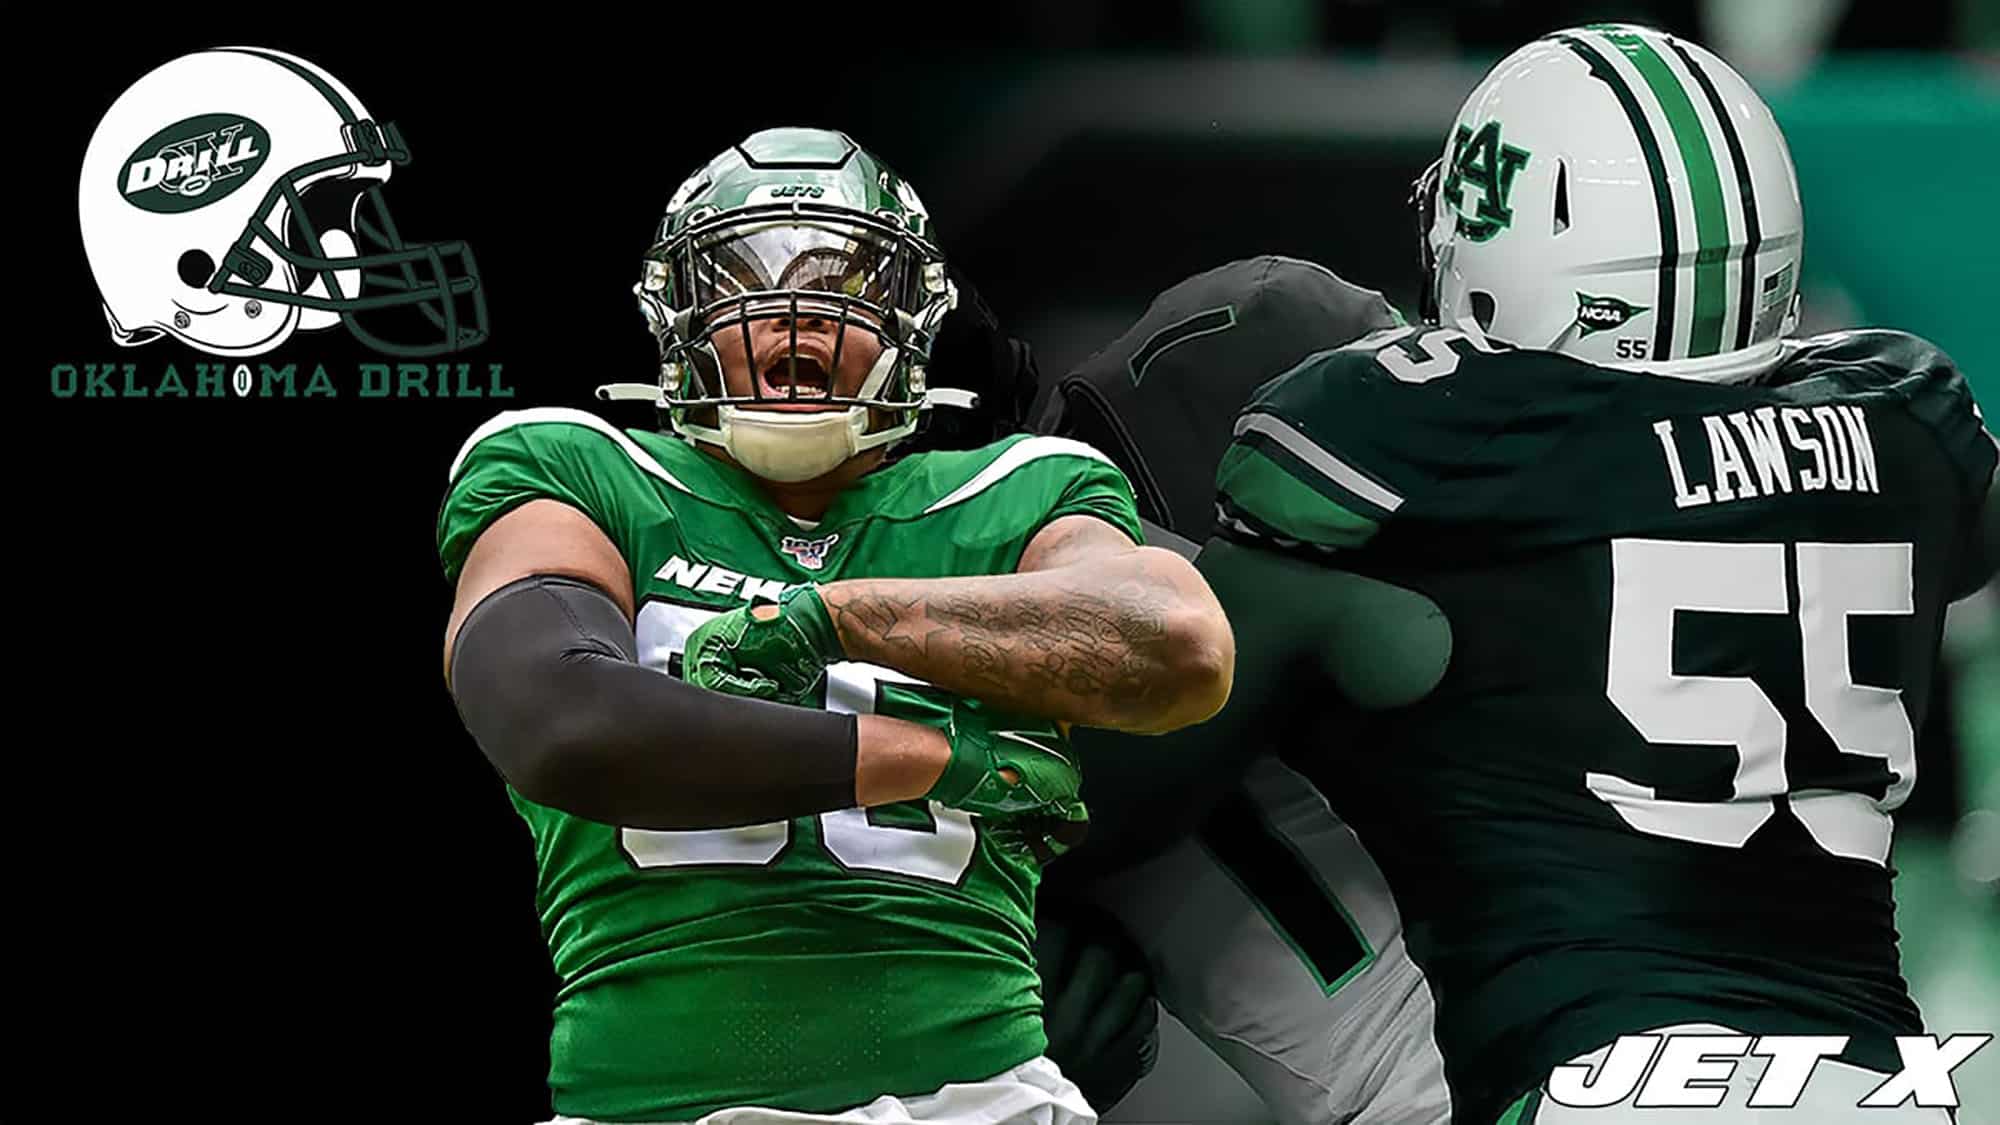 Quinnen Williams and Carl Lawson headline a NY Jets group that's now the strength of the team, the defensive line.